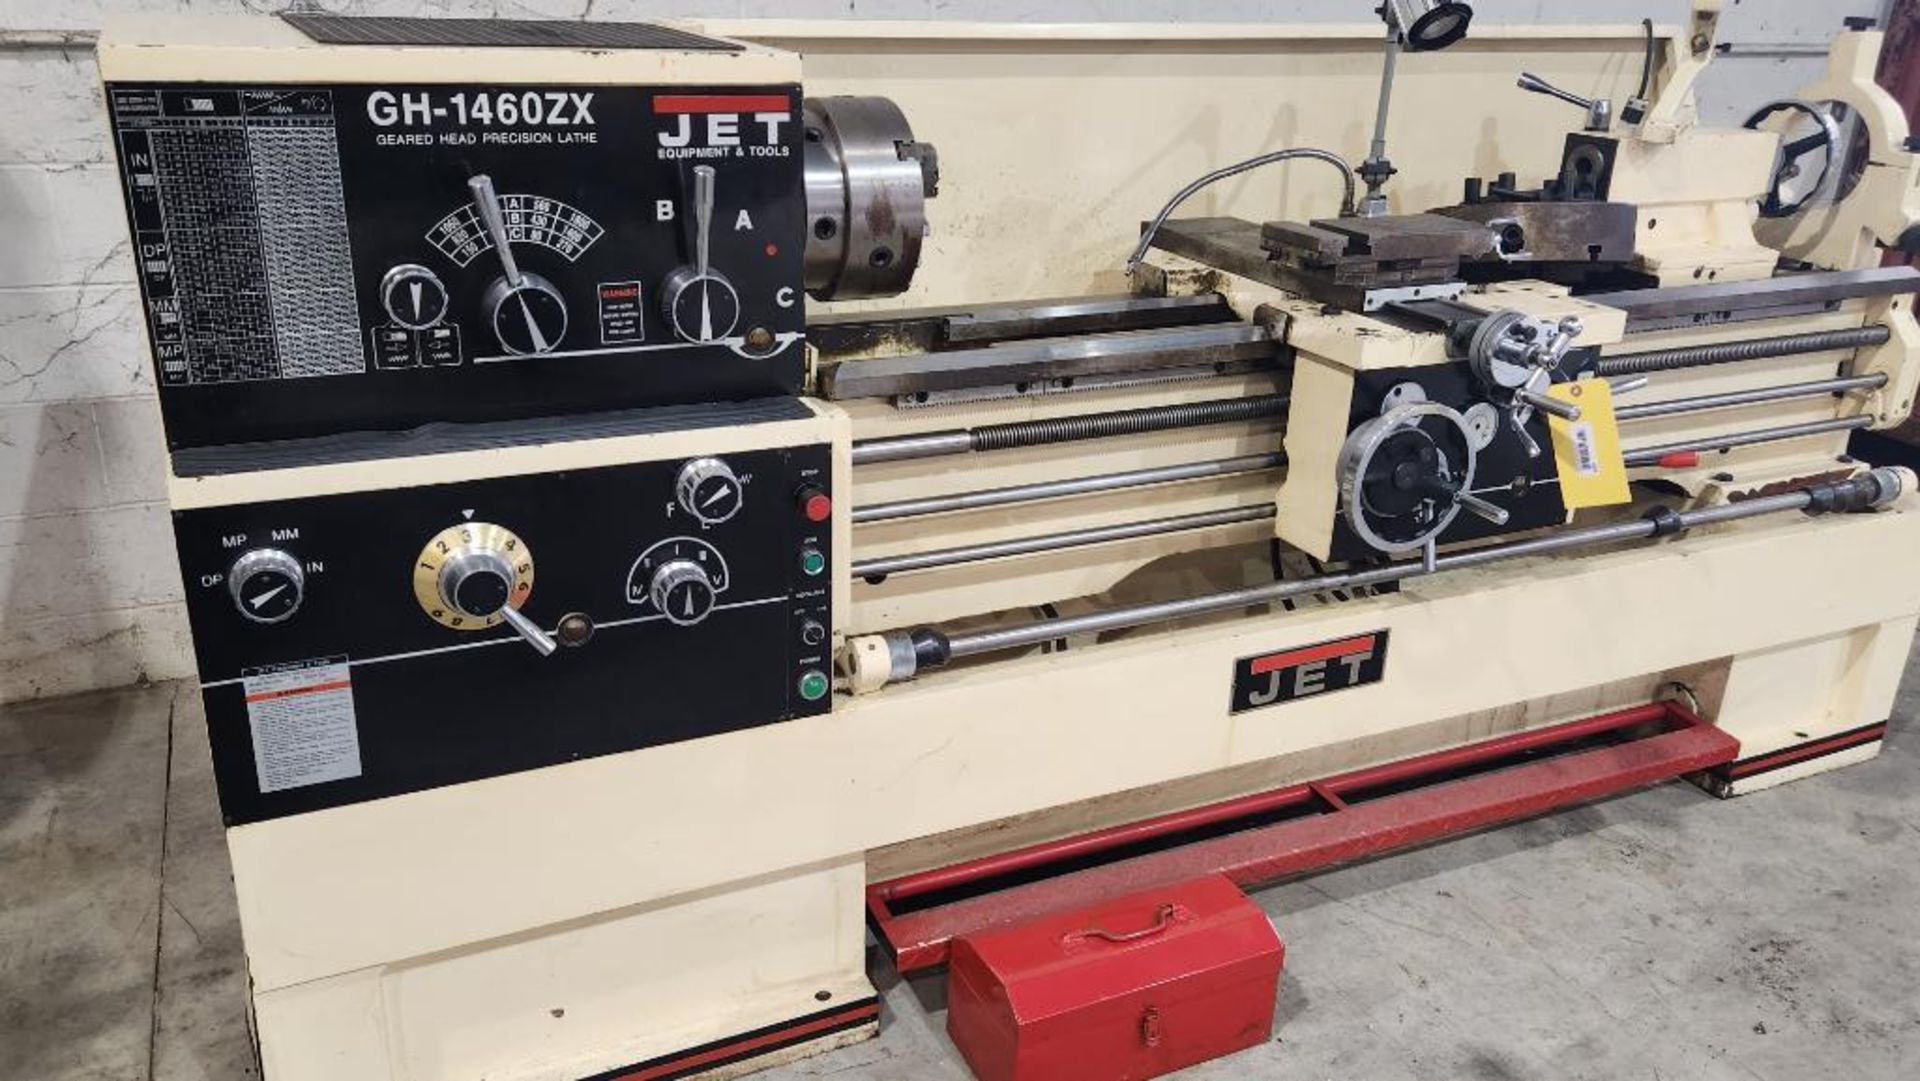 Jet Geared Head Precision Lathe, Model GH-1460ZX, S/N 000821ZX204, 230V/460V, 3-Phase - Image 3 of 14